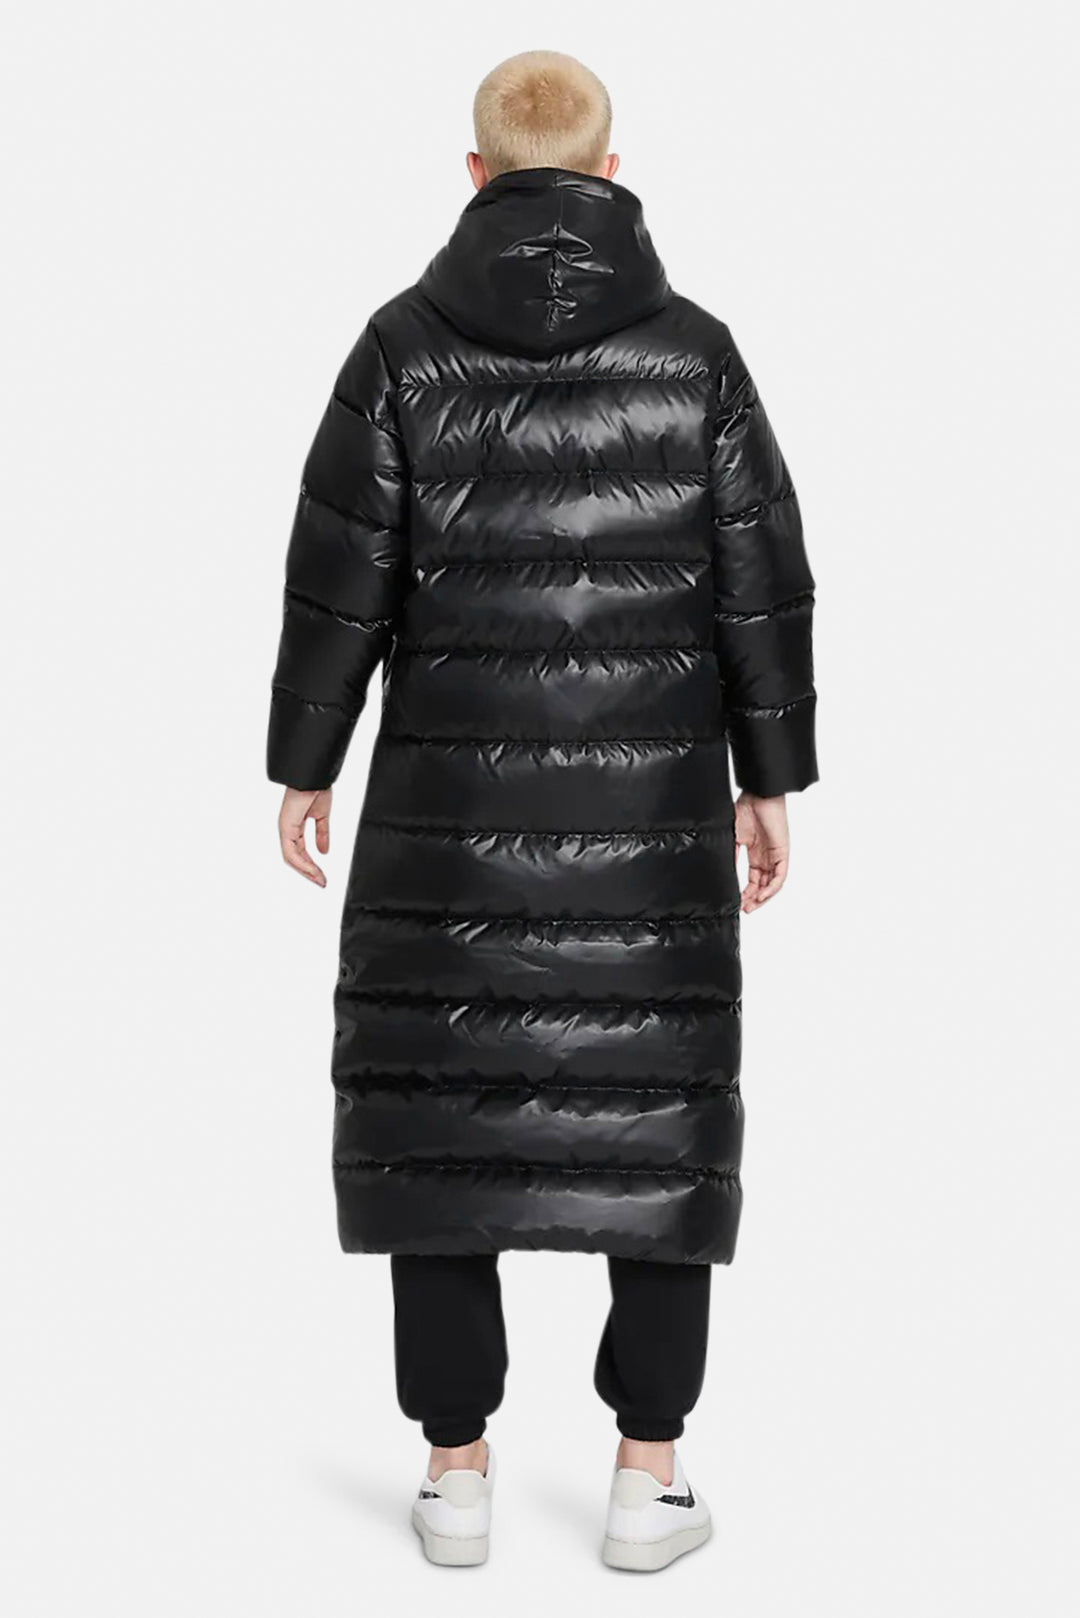 Therma-FIT City Long Puffer Jacket Black